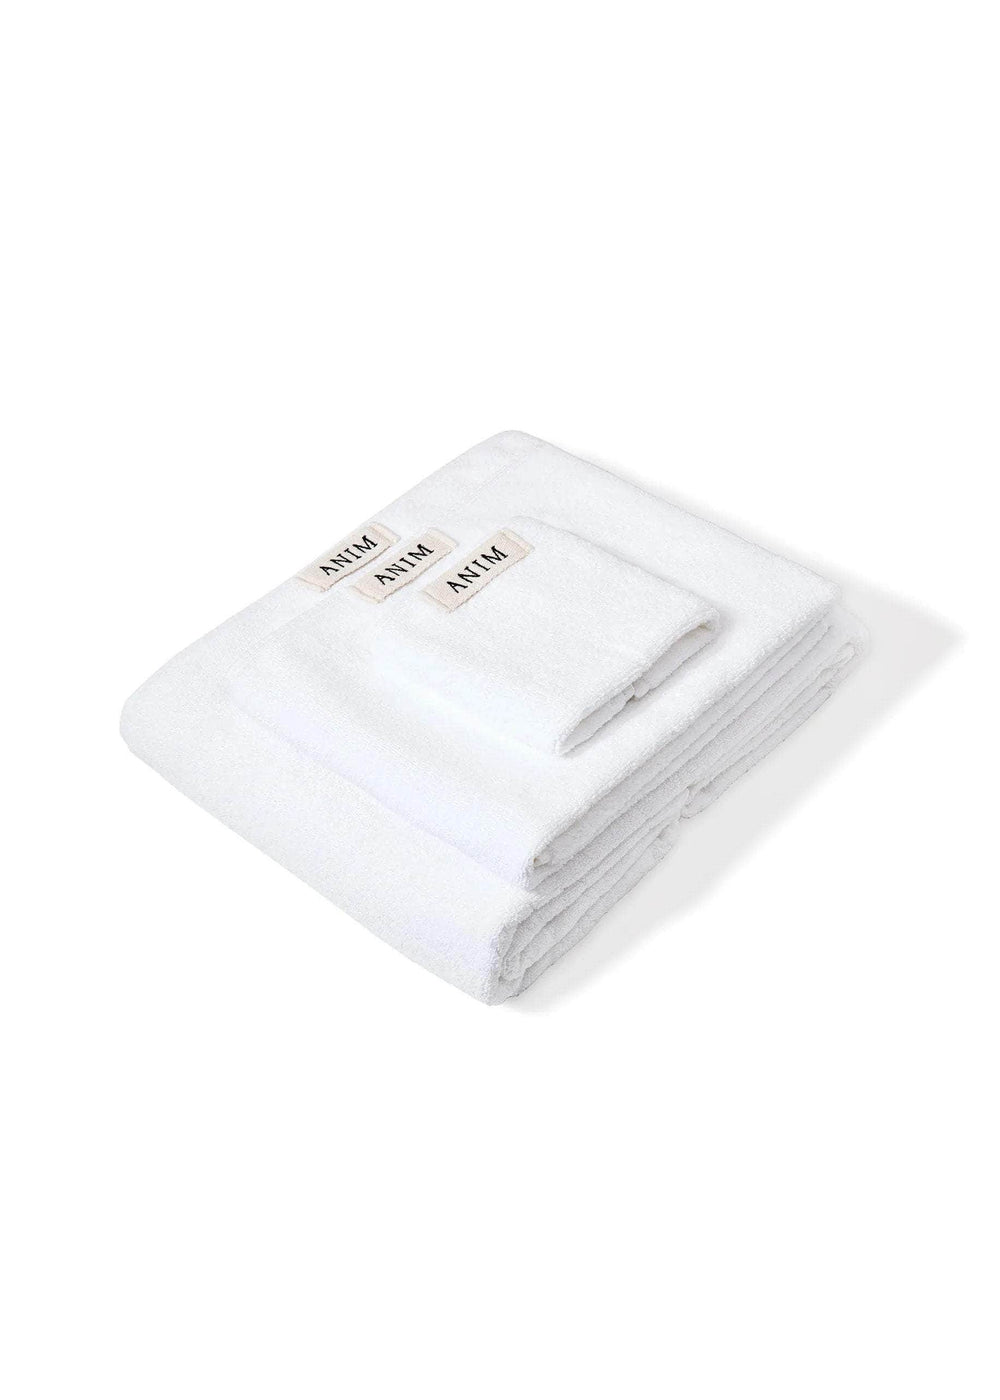 Terry Towel Set in White